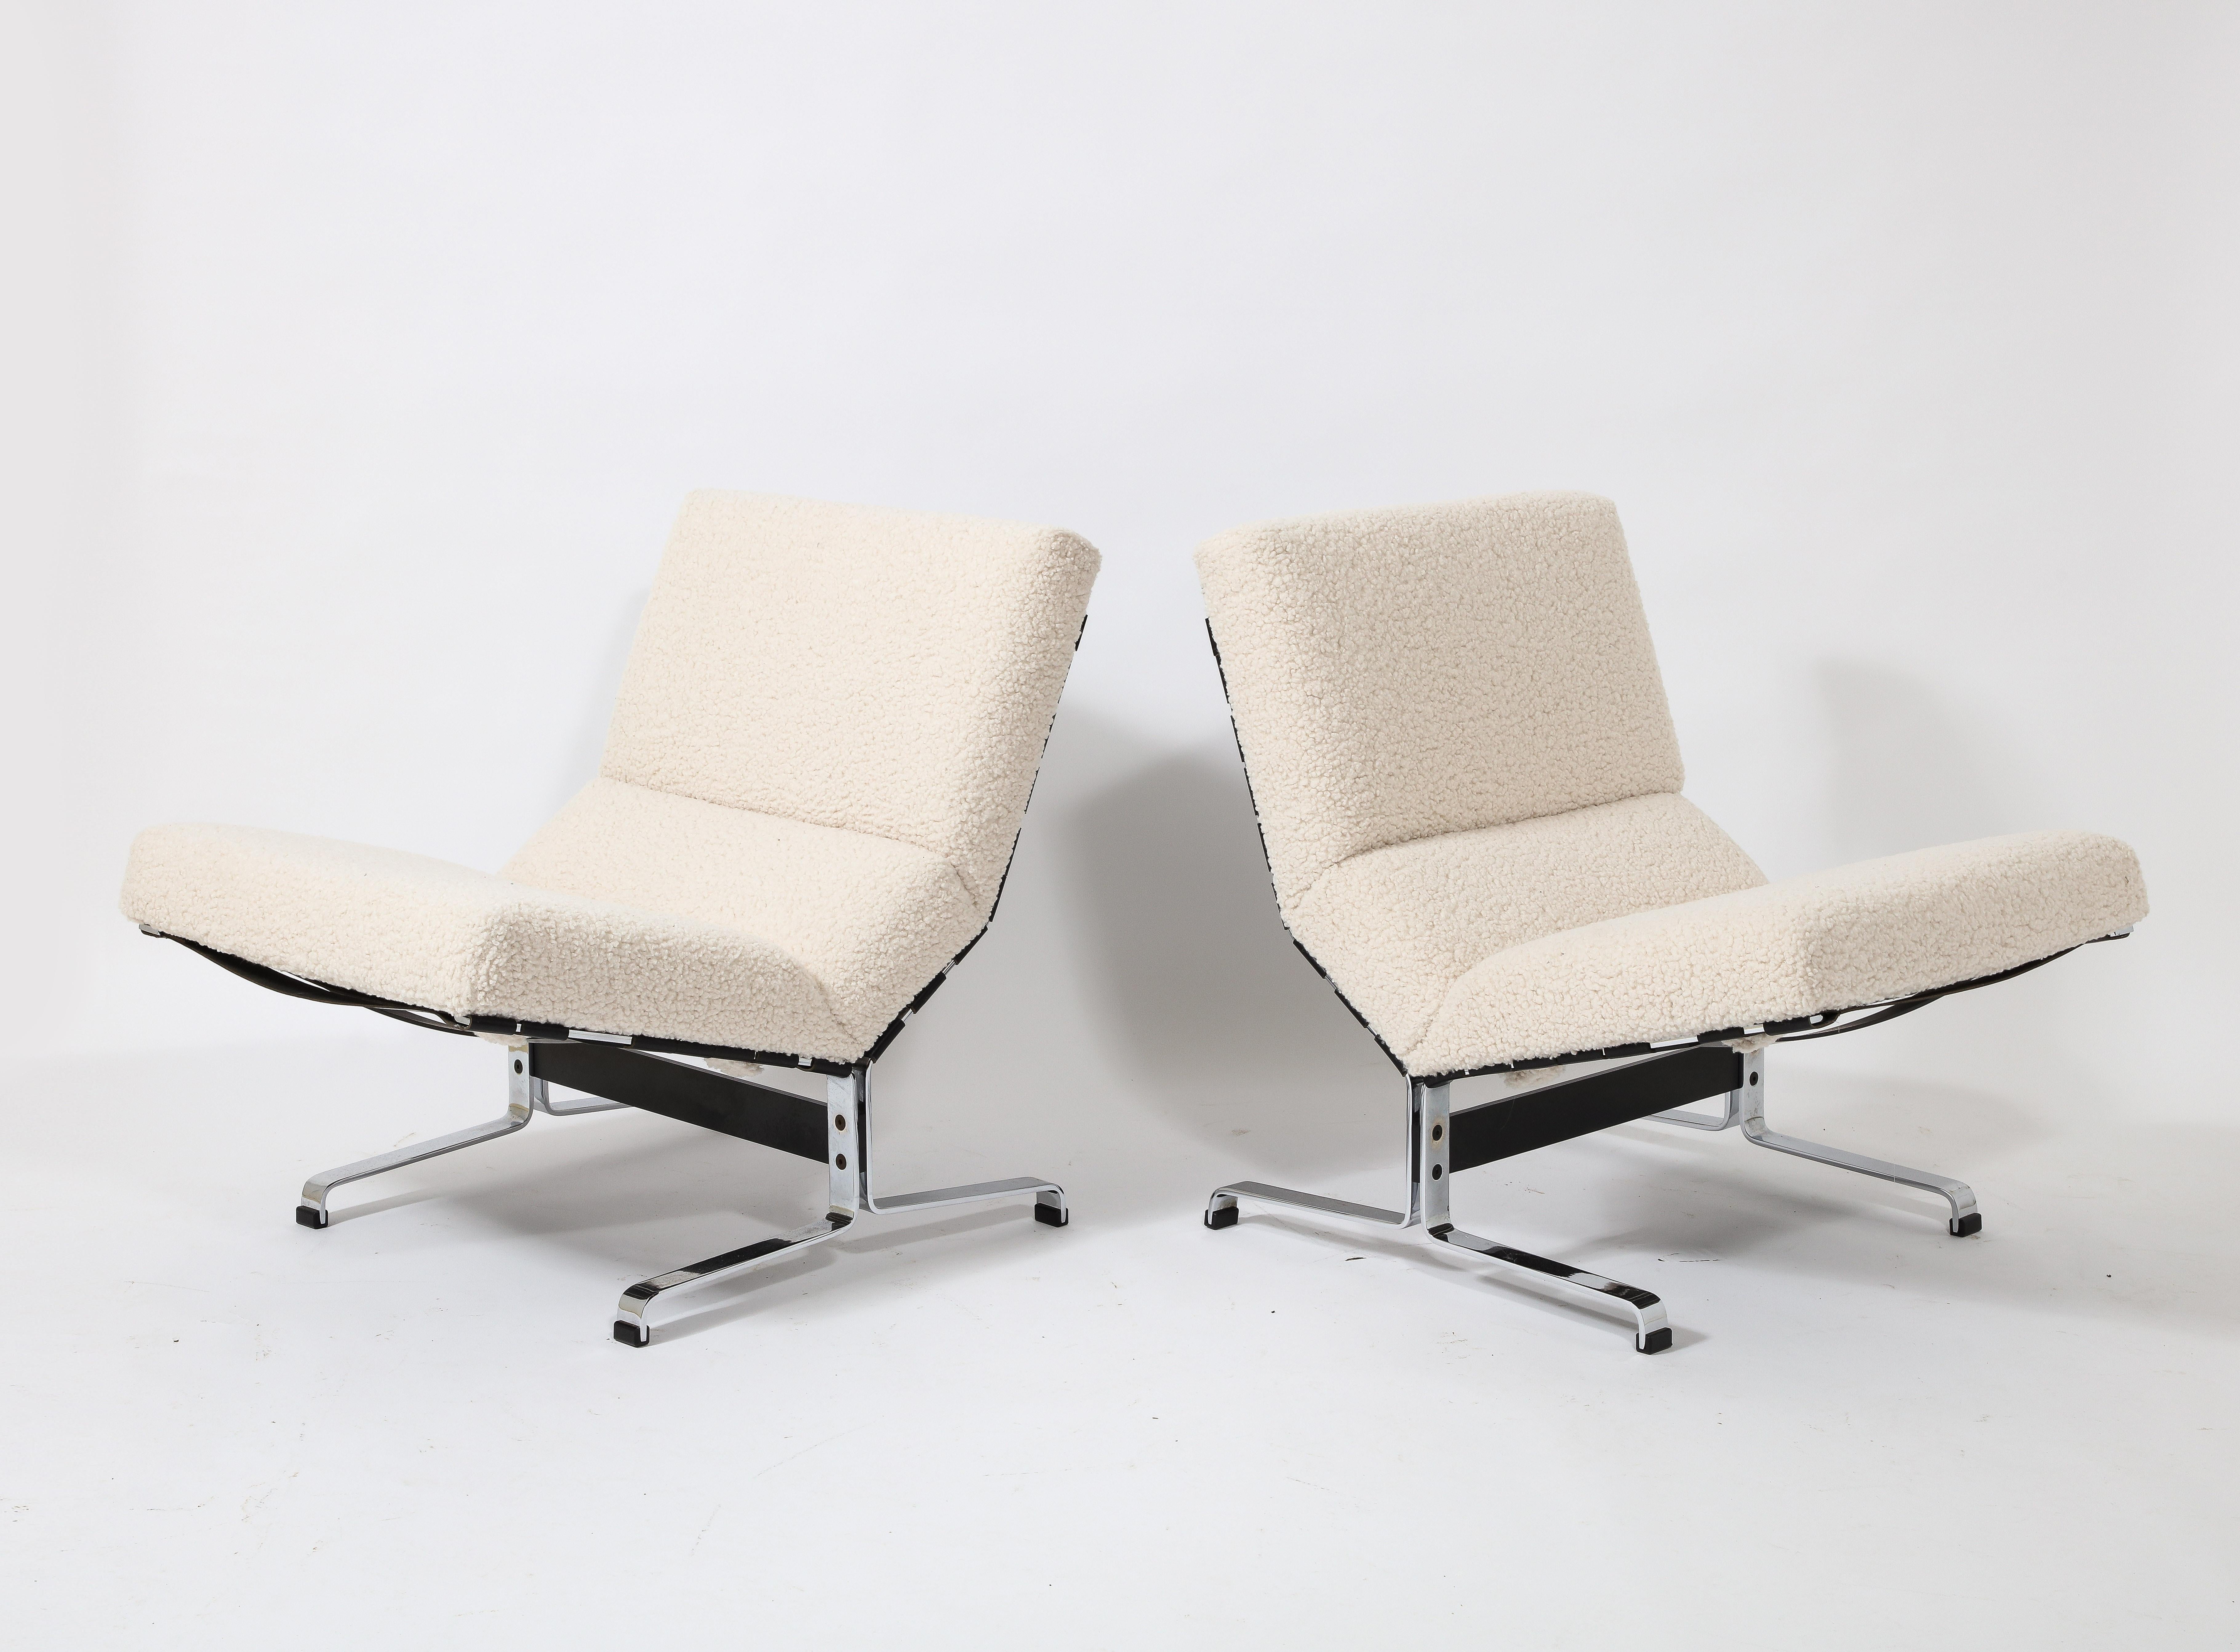 Etienne Fermigier Pair of Slipper Lounge Chairs in Cream, France 1960's For Sale 5